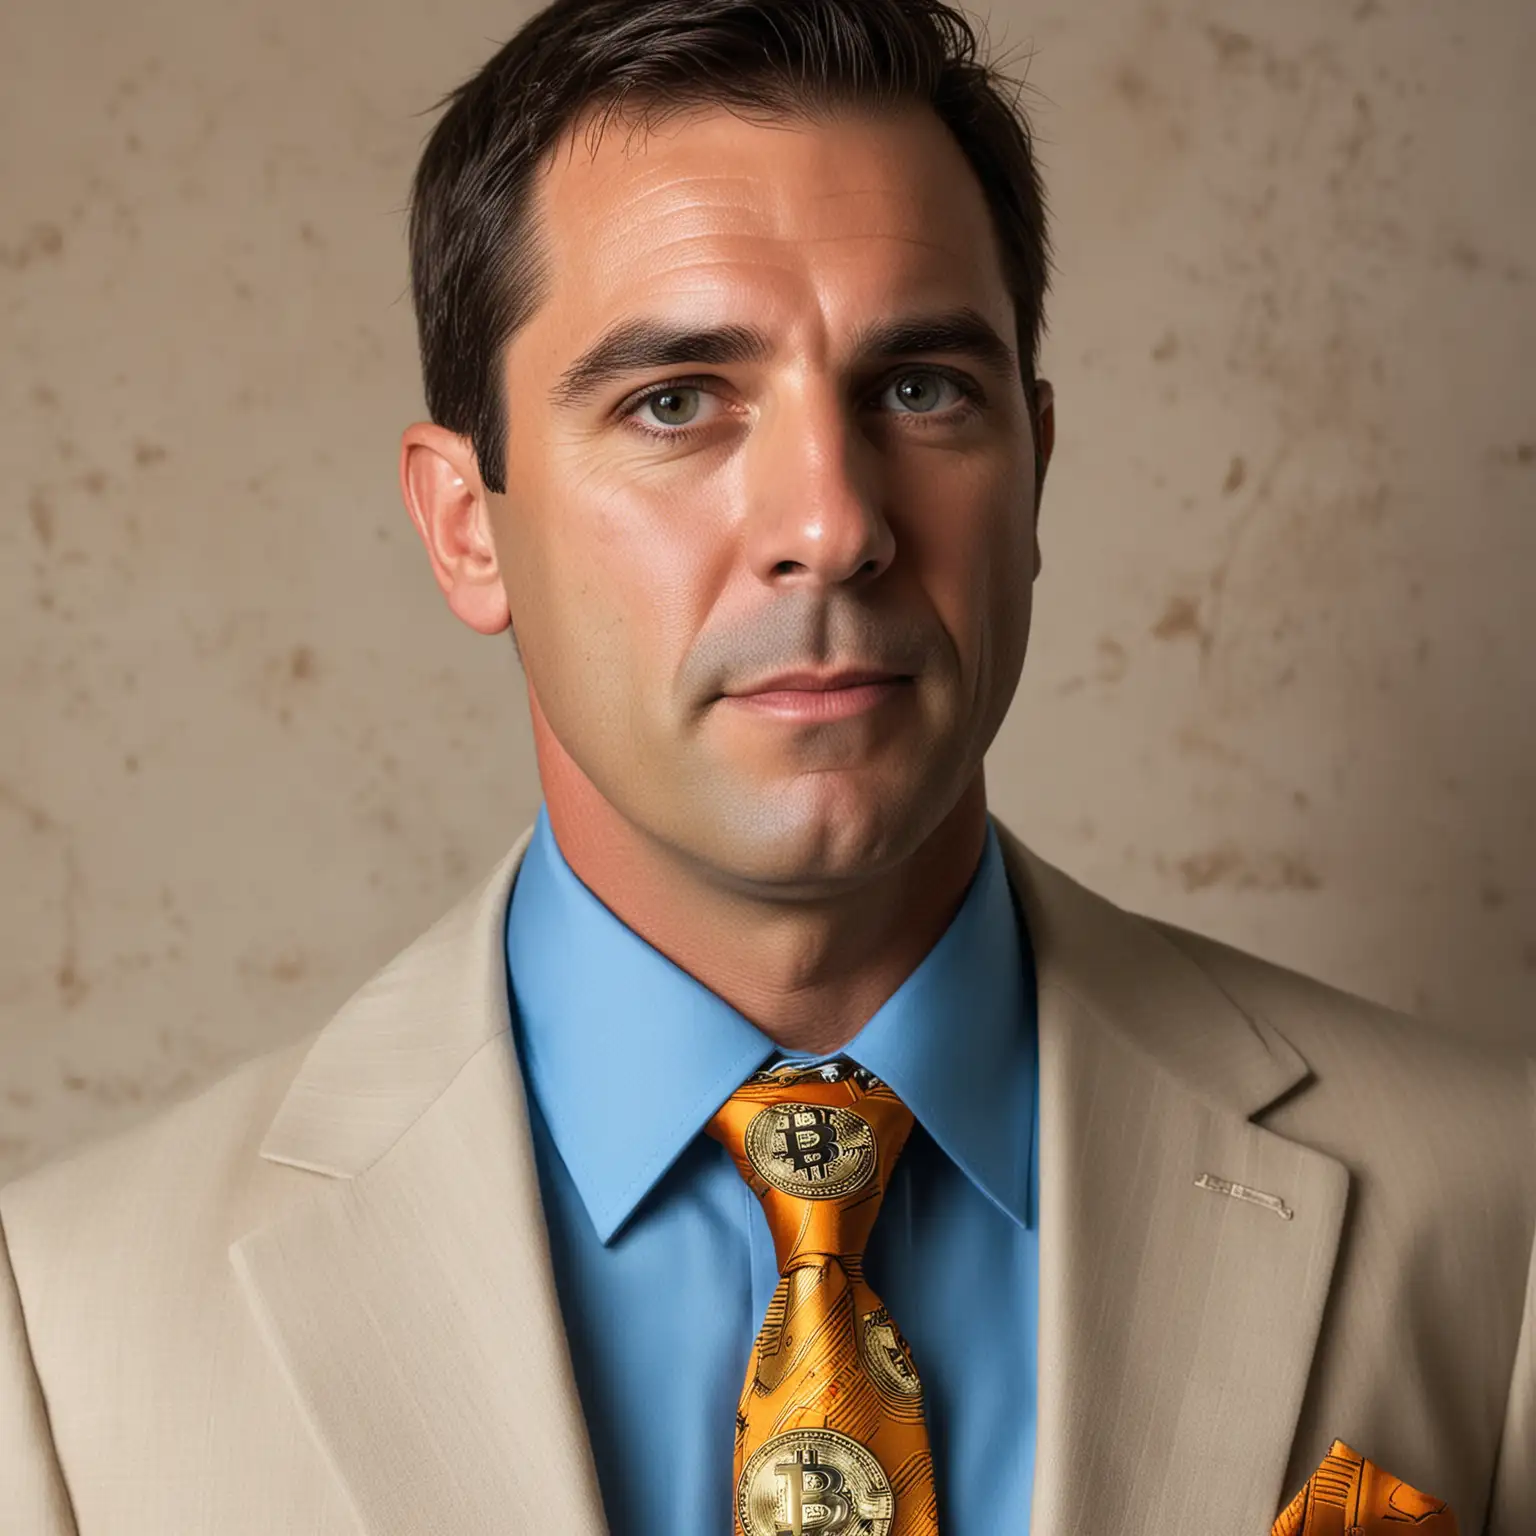 A private investigator named "Bitcoin P.I.," like the characters James Bond 007 and Magnum P.I., show a hint of the Bitcoin pattern on his tie